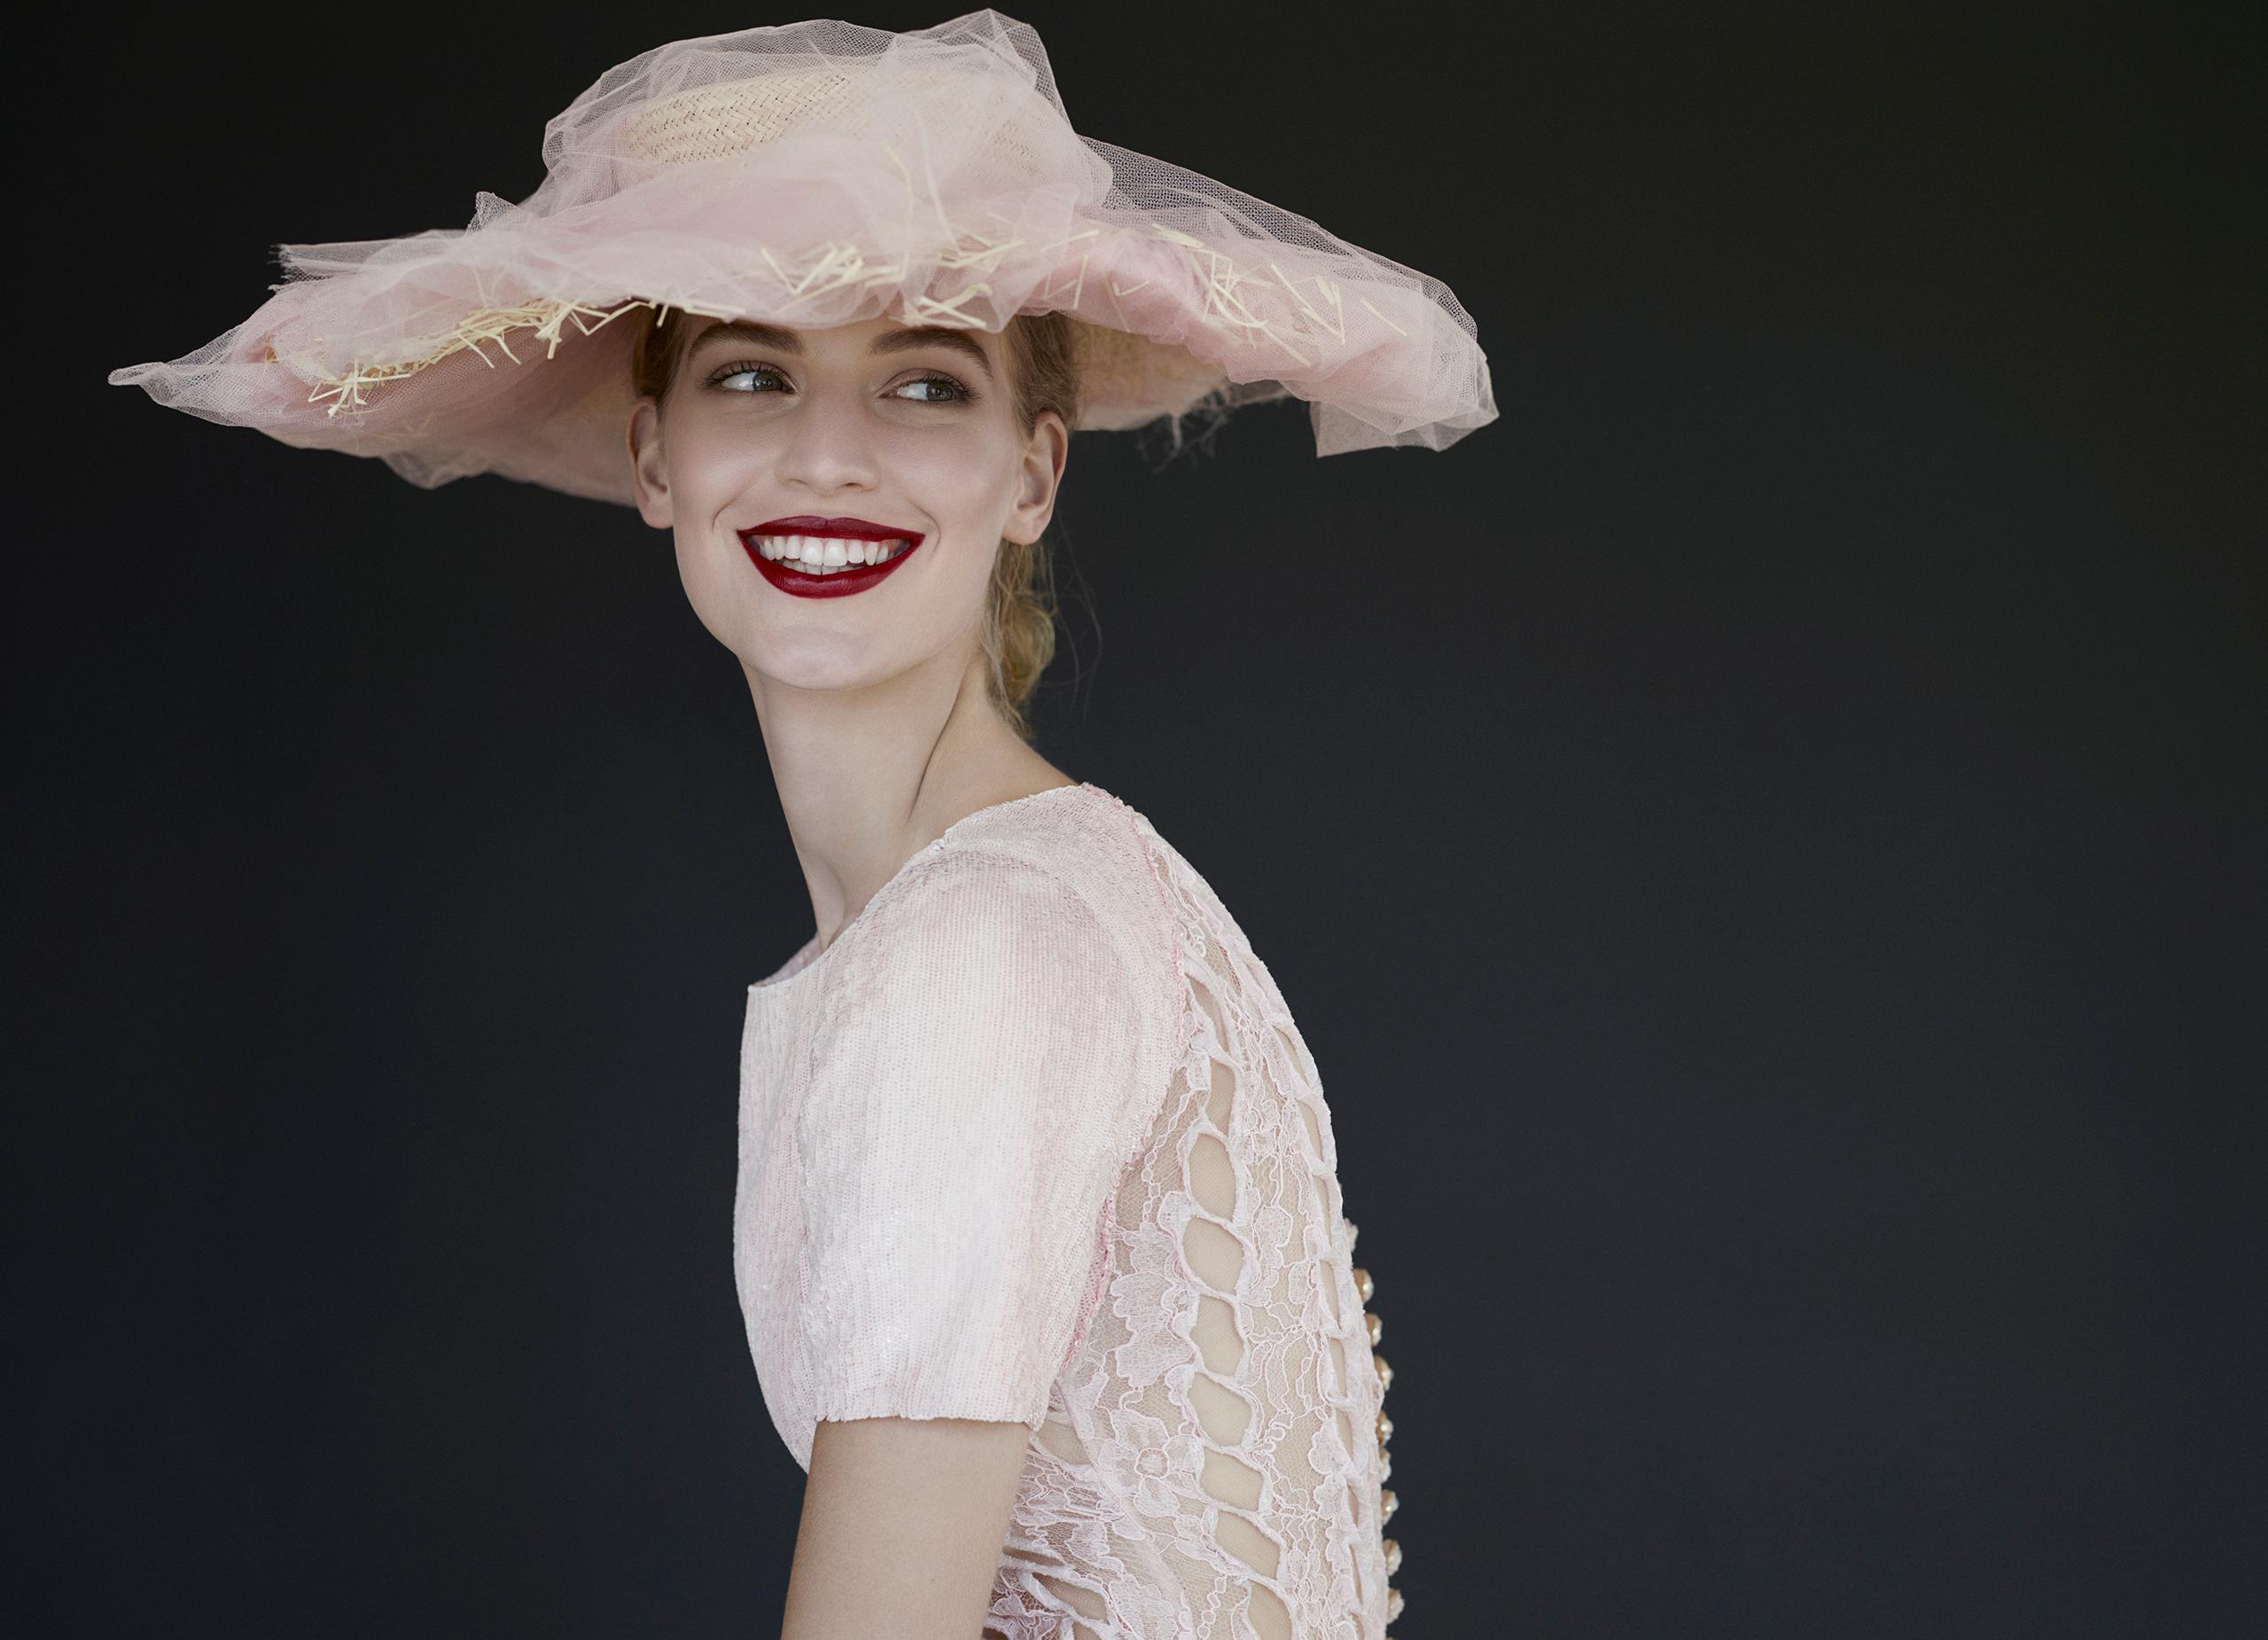 Now On Until 11 September: ’Women In Chanel’ Exhibition @ Ludwig Museum